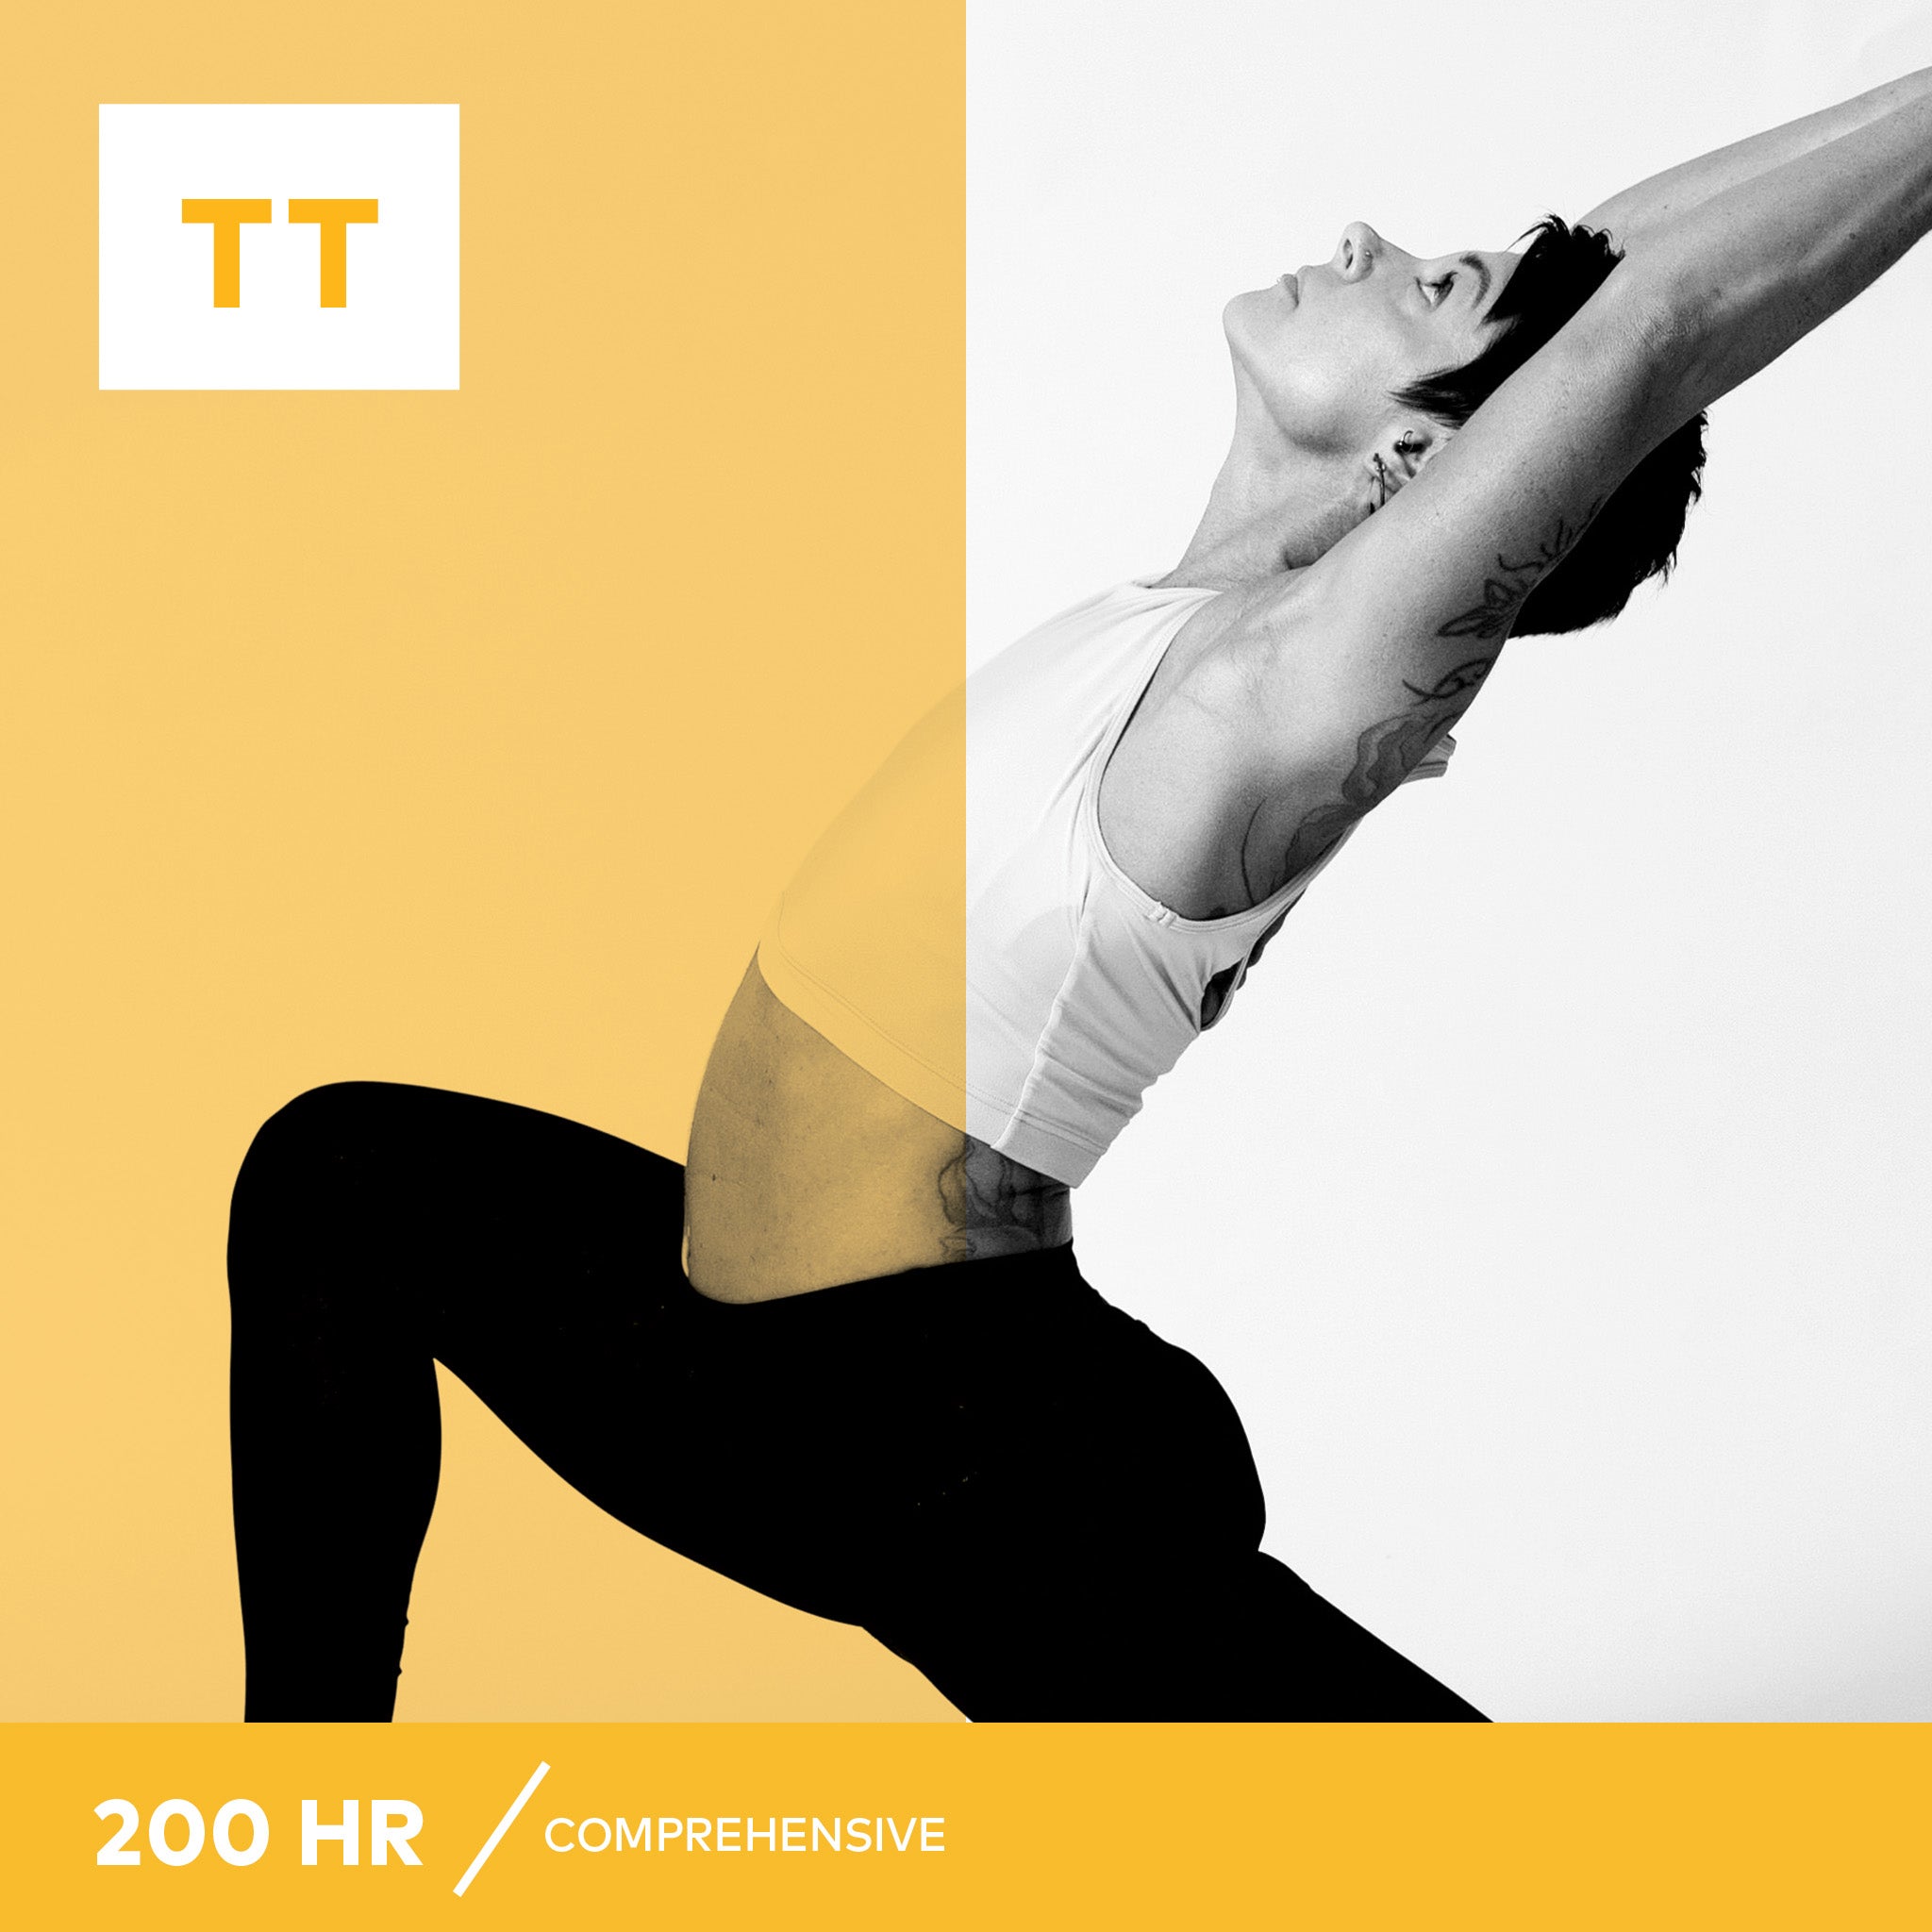 70% Off a Month of Yoga - CorePower Yoga - Corporate/National